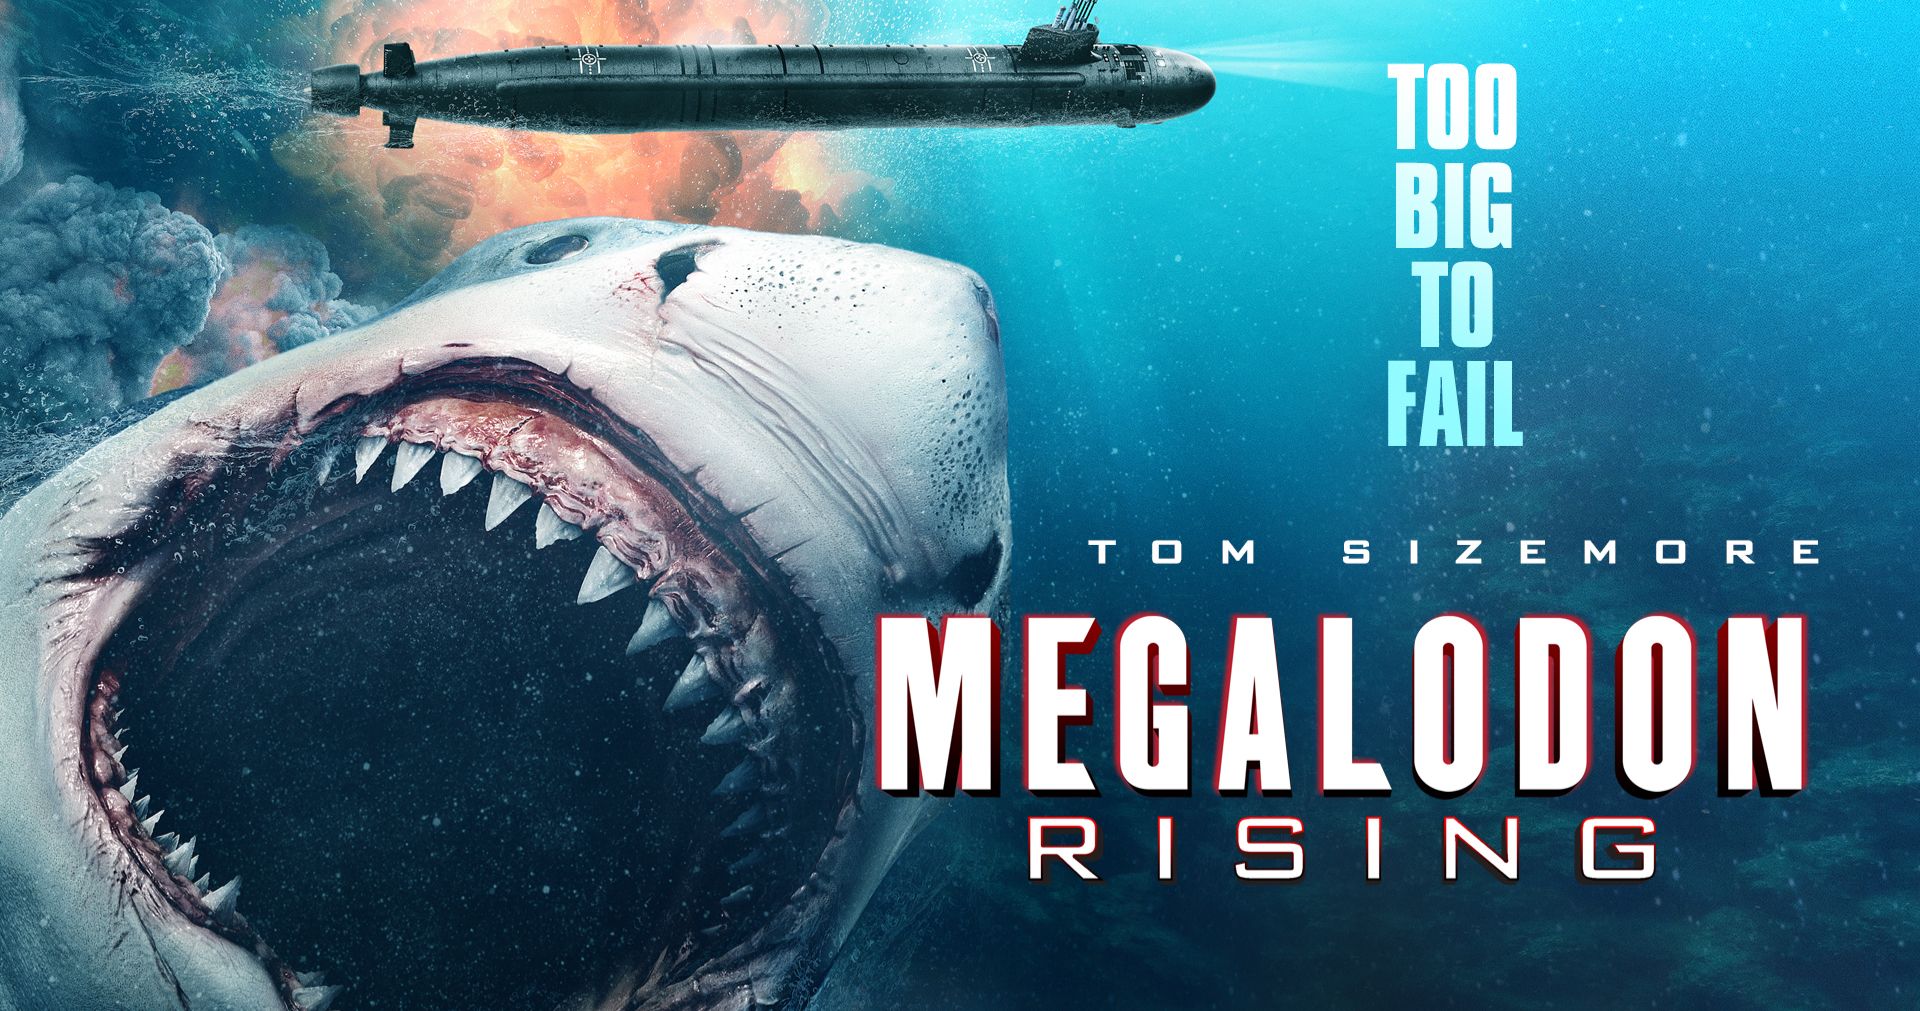 Megalodon Rising Trailer Has Tom Sizemore at War with the World's